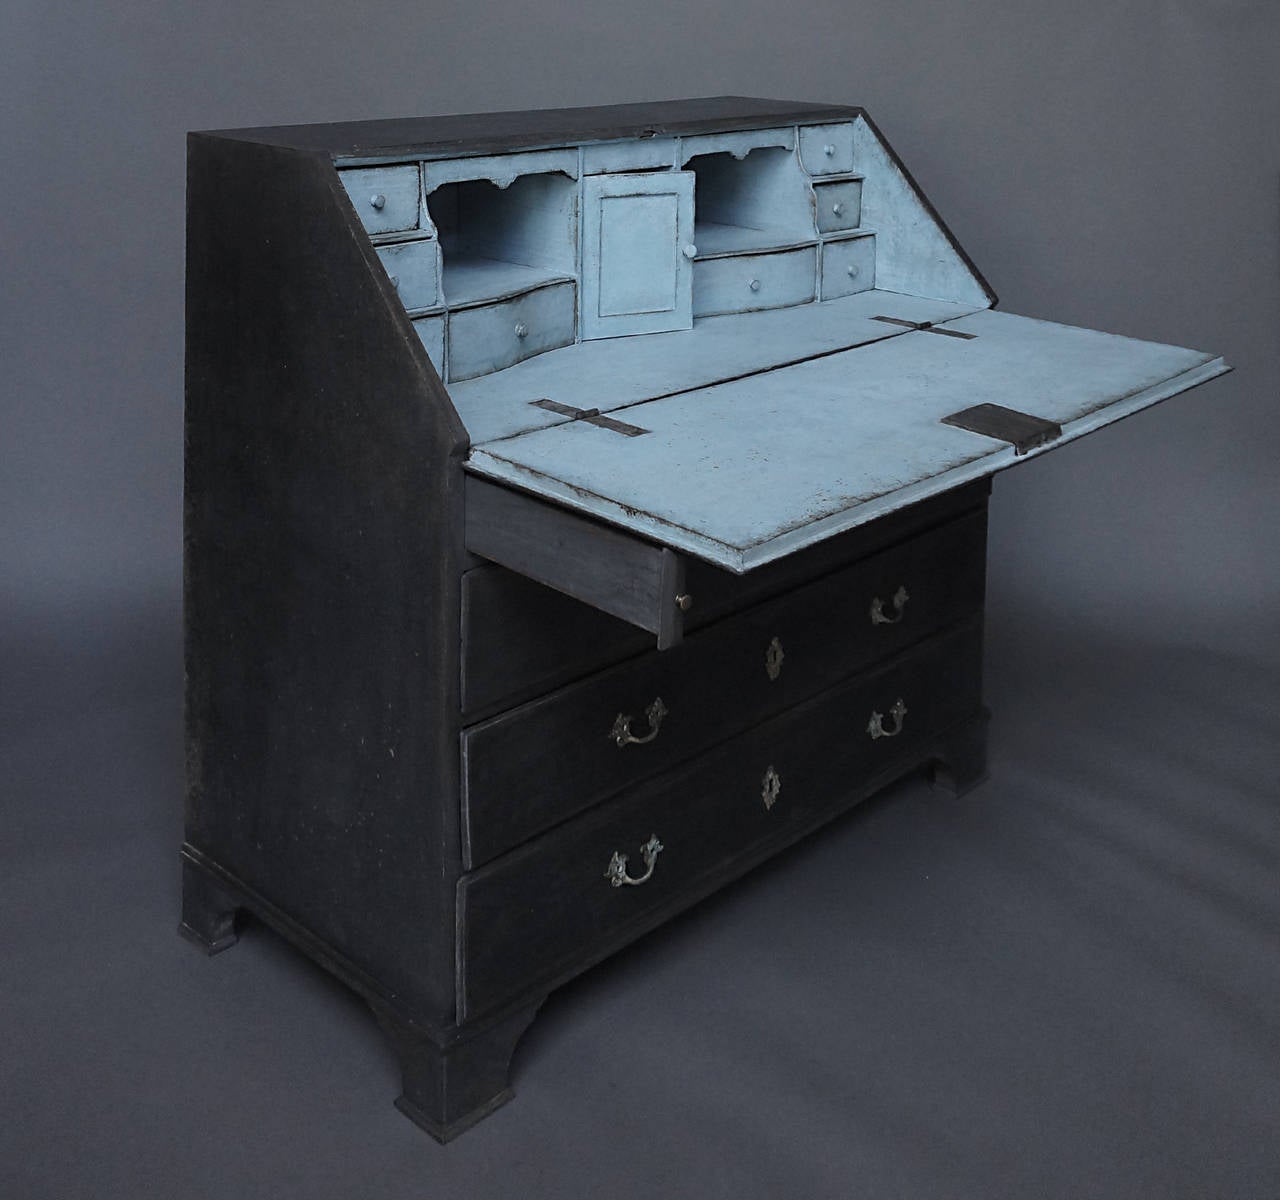 Slant front writing desk in black paint, Sweden, circa 1830. Fitted interior with drawers and compartments, and a book support on the exterior. Two over three drawers on a bracket base.